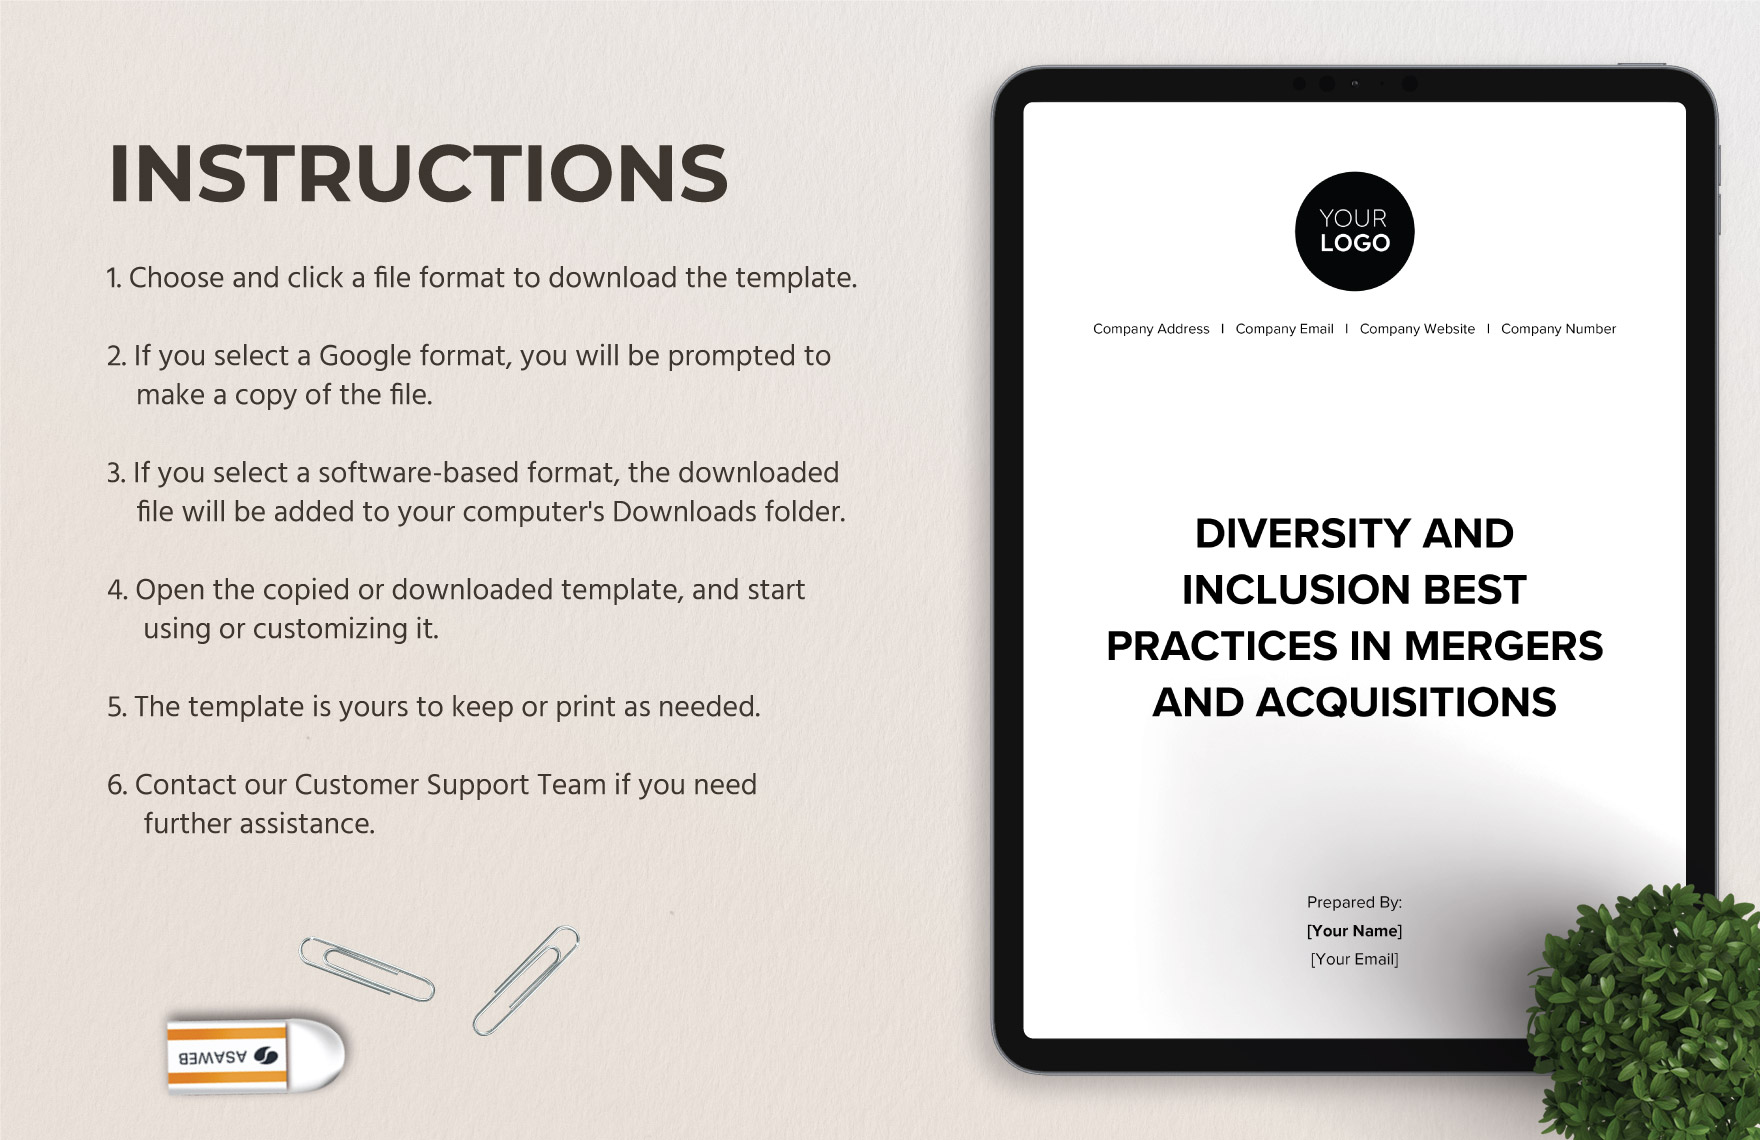 Diversity and Inclusion Best Practices in Mergers and Acquisitions HR Template